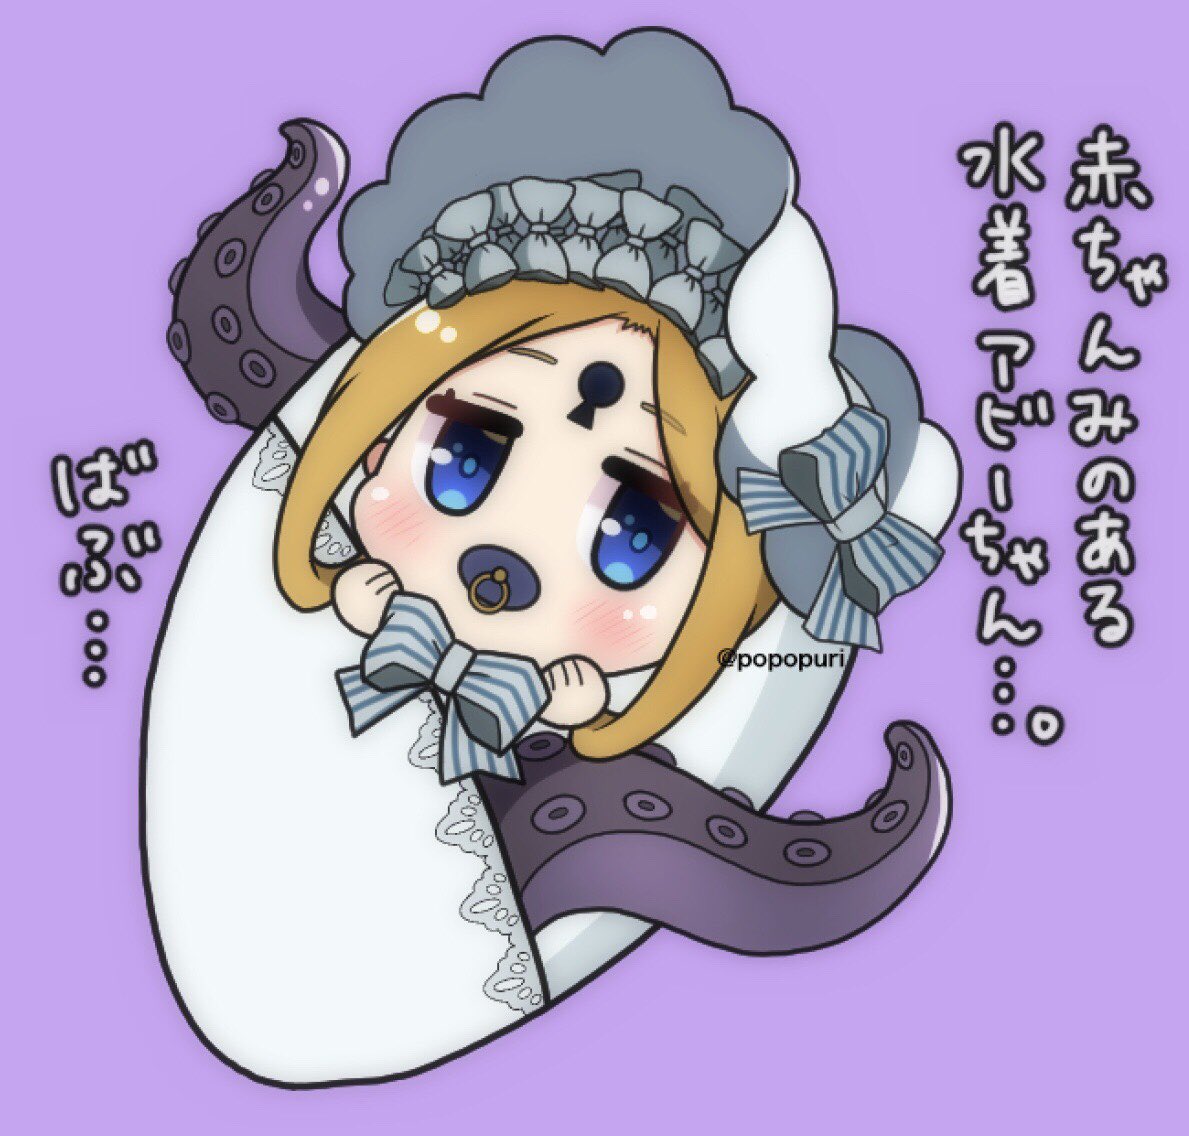 1girl abigail_williams_(fate/grand_order) abigail_williams_(swimsuit_foreigner)_(fate) baby bangs blue_eyes blush bonnet bow brown_hair commentary_request eyebrows_visible_through_hair fate/grand_order fate_(series) full_body hair_bow hat hat_bow keyhole looking_at_viewer pacifier parted_bangs popo_(popopuri) purple_background simple_background solo striped striped_bow suction_cups tentacles translation_request twitter_username white_bow white_headwear younger